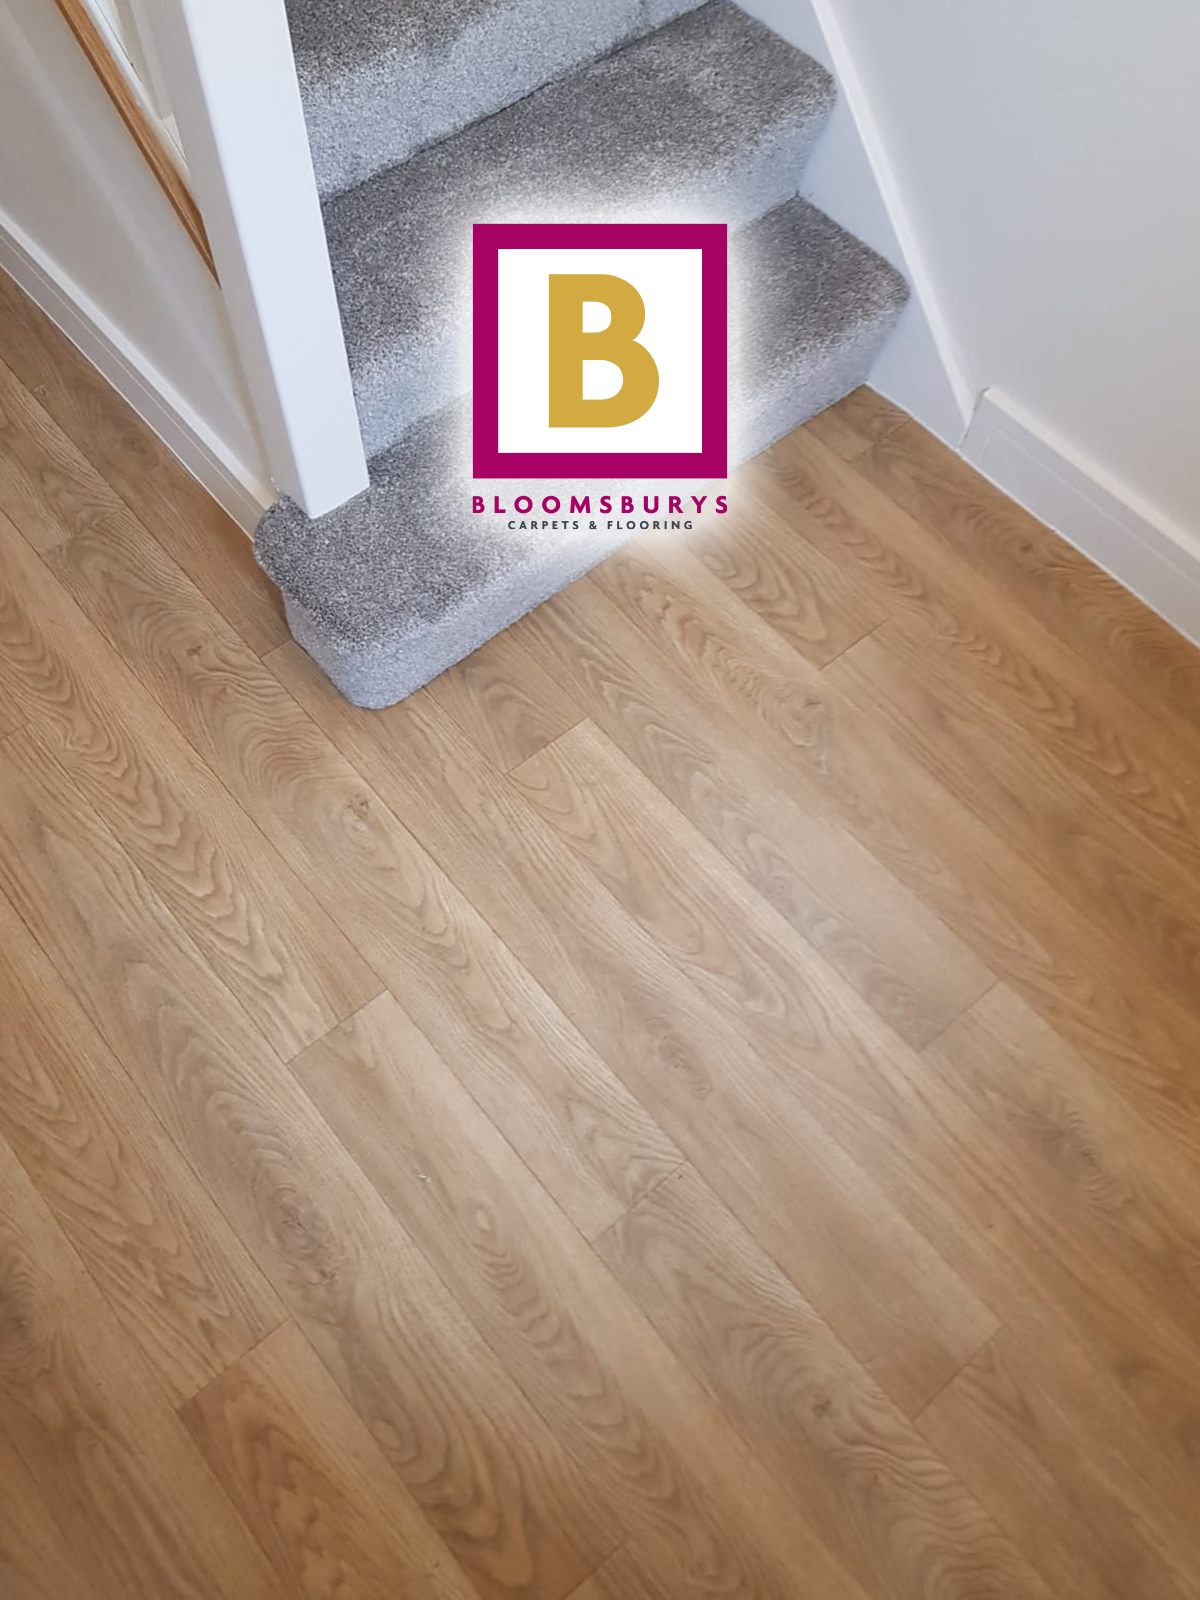 Pet friendly (approved) floor finishes!